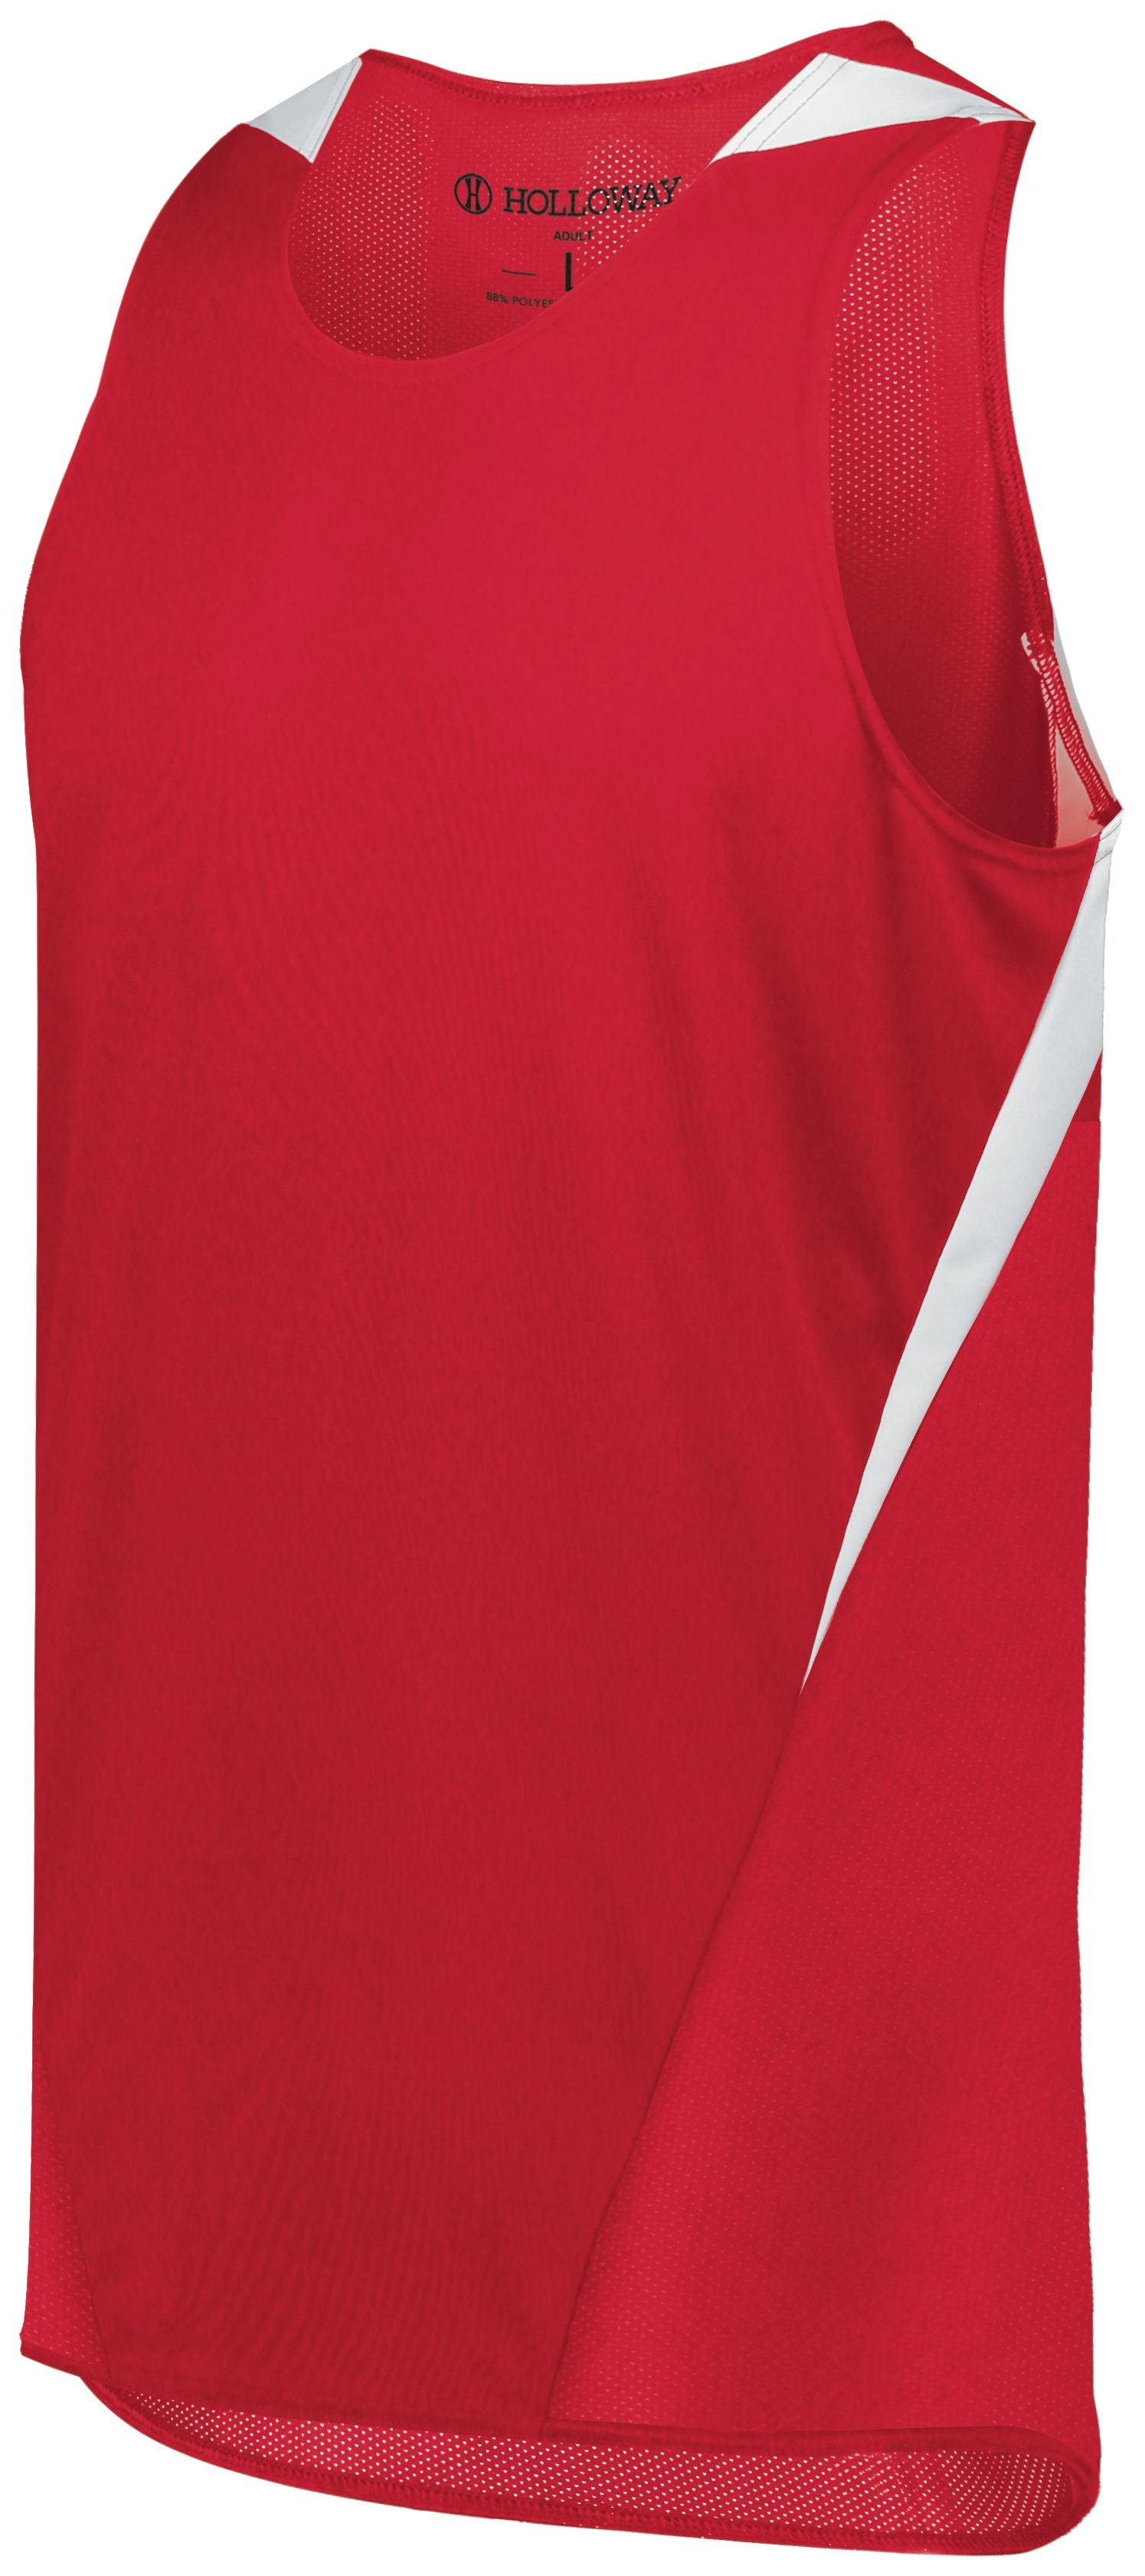 Holloway Pr Max Track Jersey in Scarlet/White  -Part of the Adult, Adult-Jersey, Track-Field, Holloway, Shirts product lines at KanaleyCreations.com